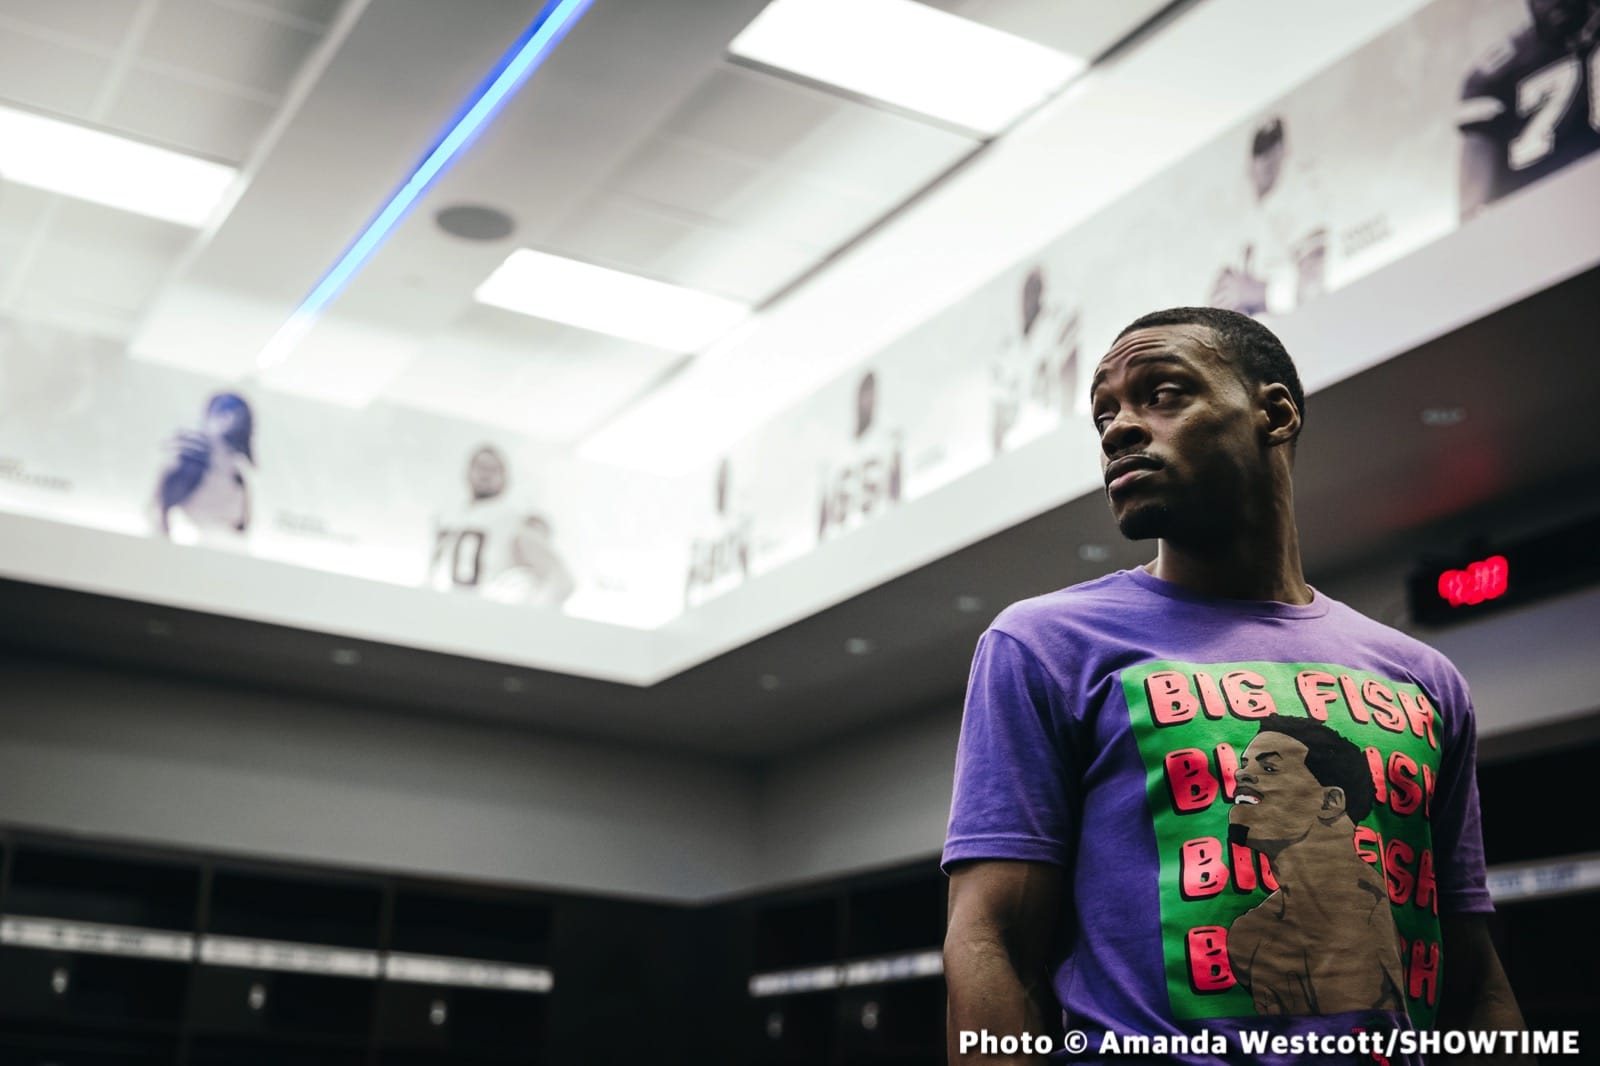 Image: Errol Spence warns Crawford: He enjoys being "the will" out of his opponents